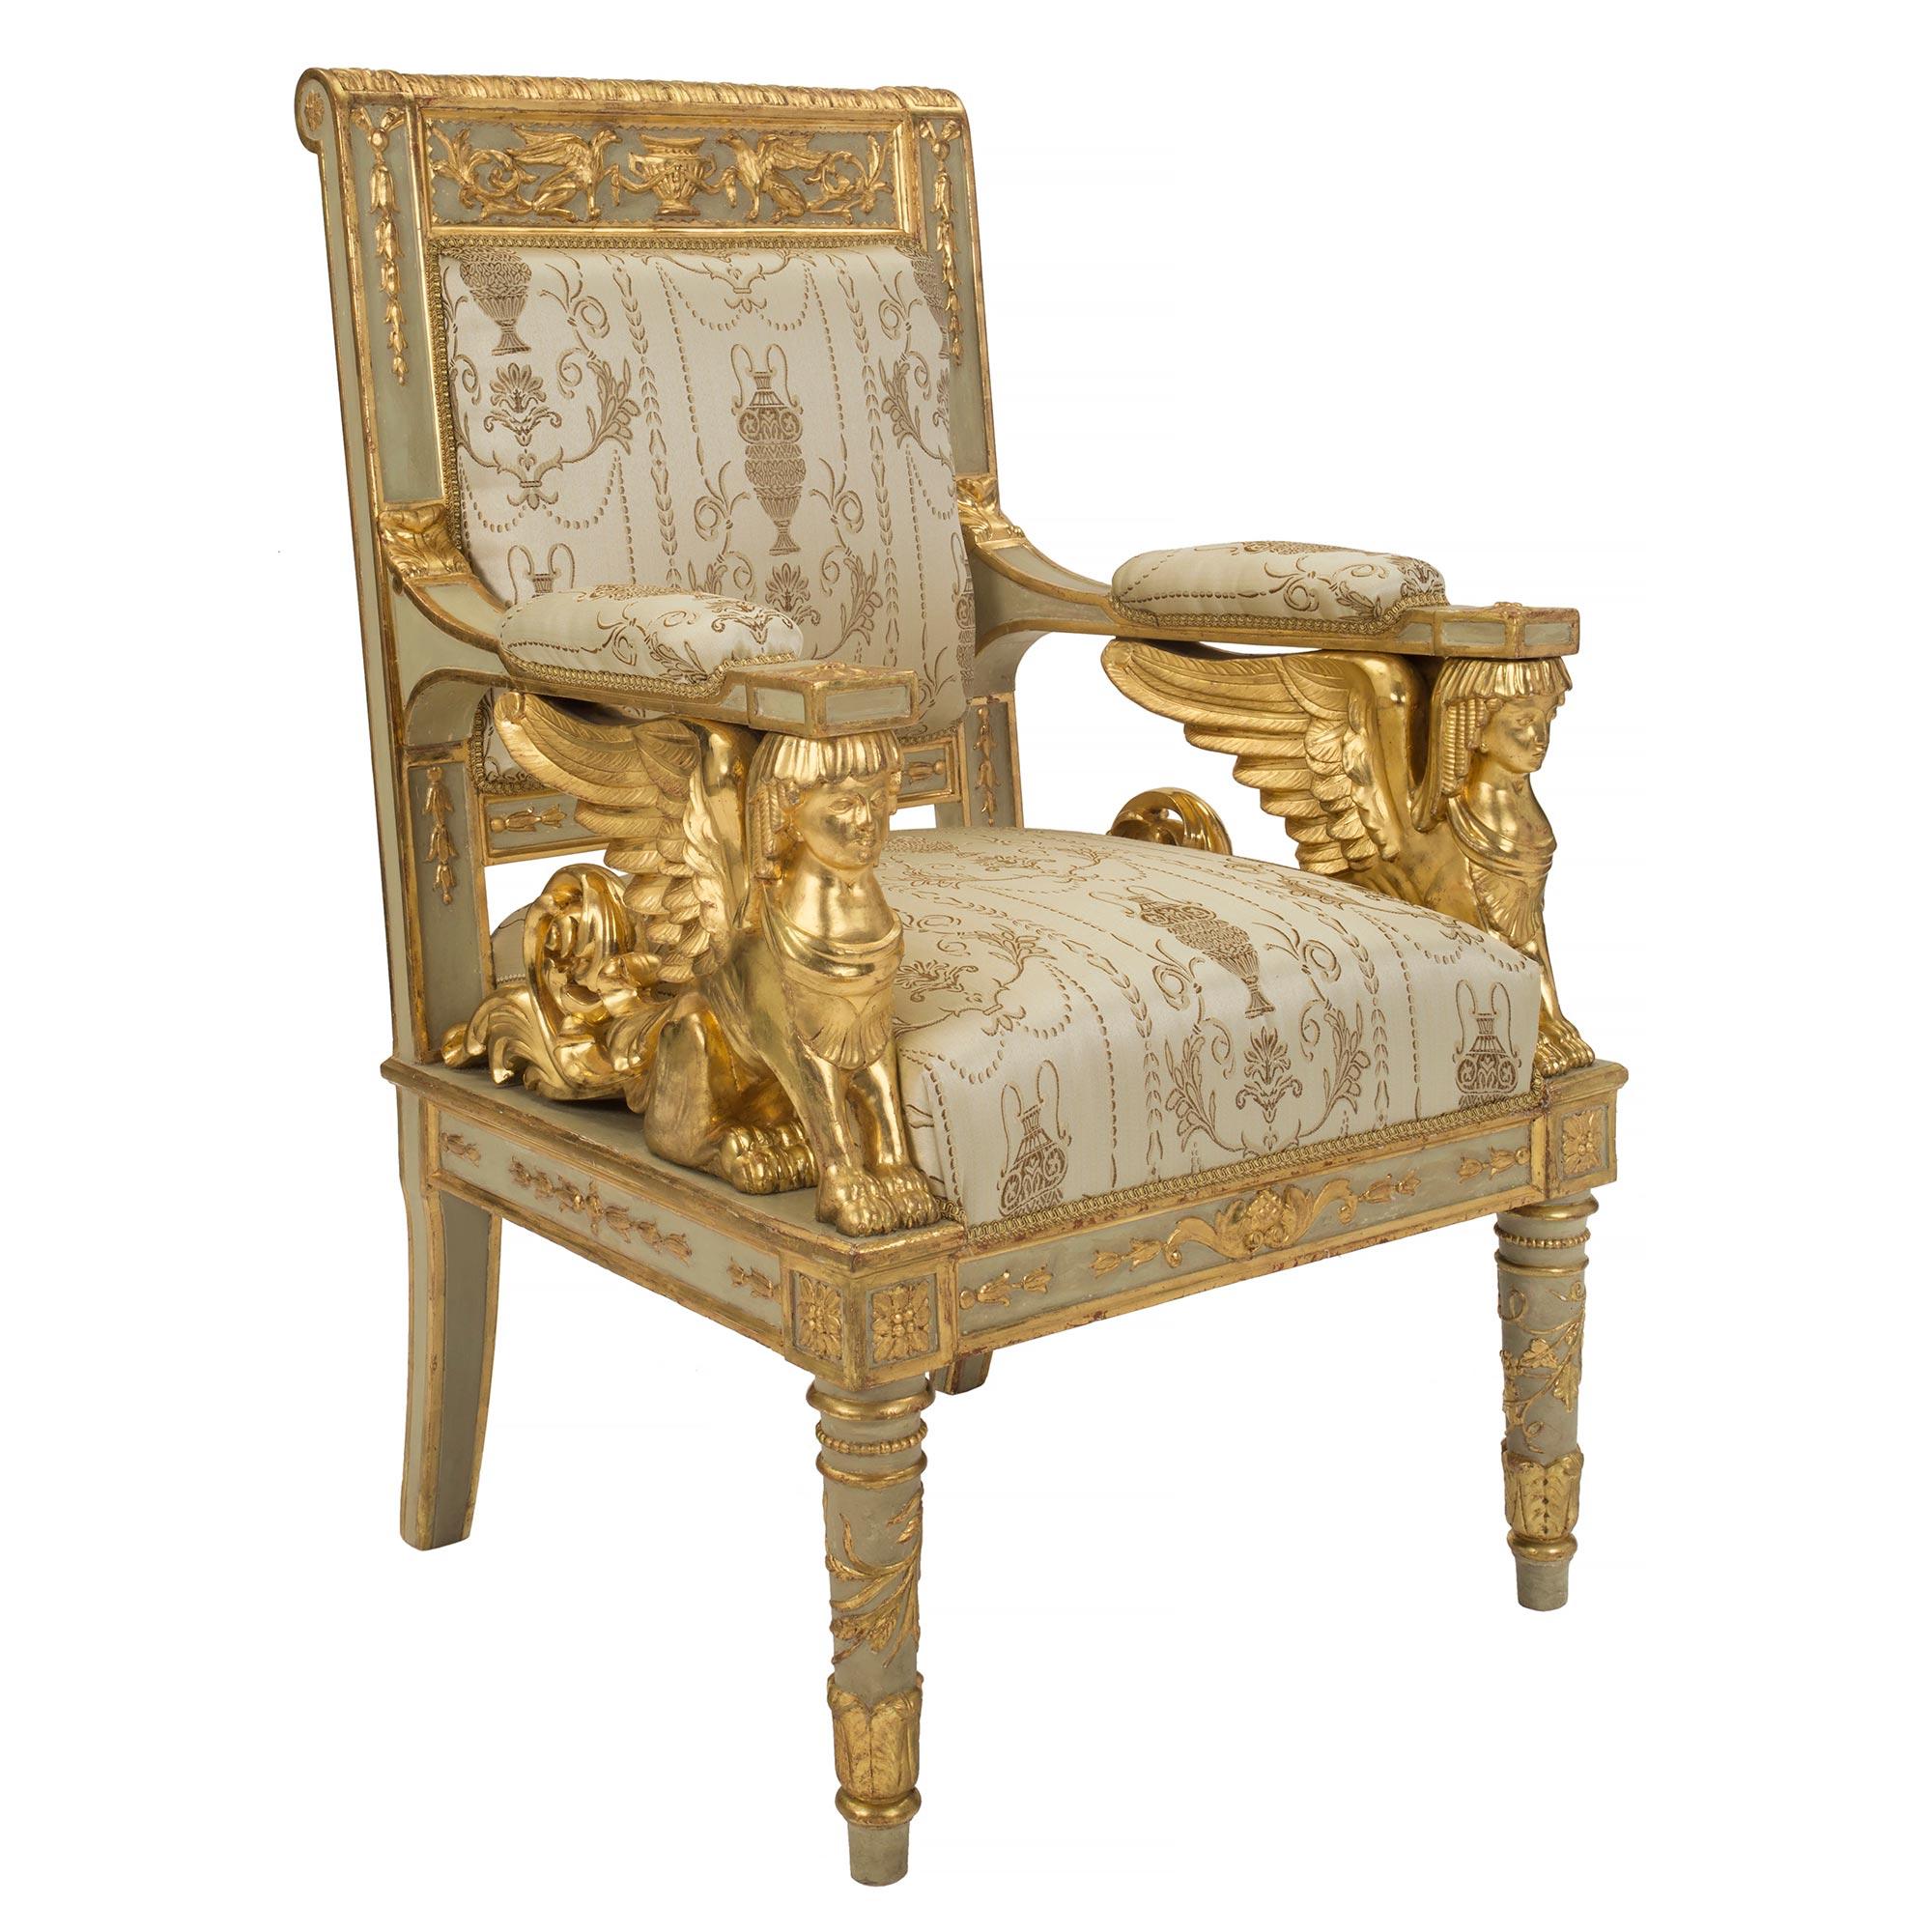 An exquisite pair of Italian mid 19th century Neo-Classical st. armchairs. The light green patinated frame is stunningly decorated with giltwood designs throughout and three matching upholstered pillows. Raised by front tapered topie shaped legs